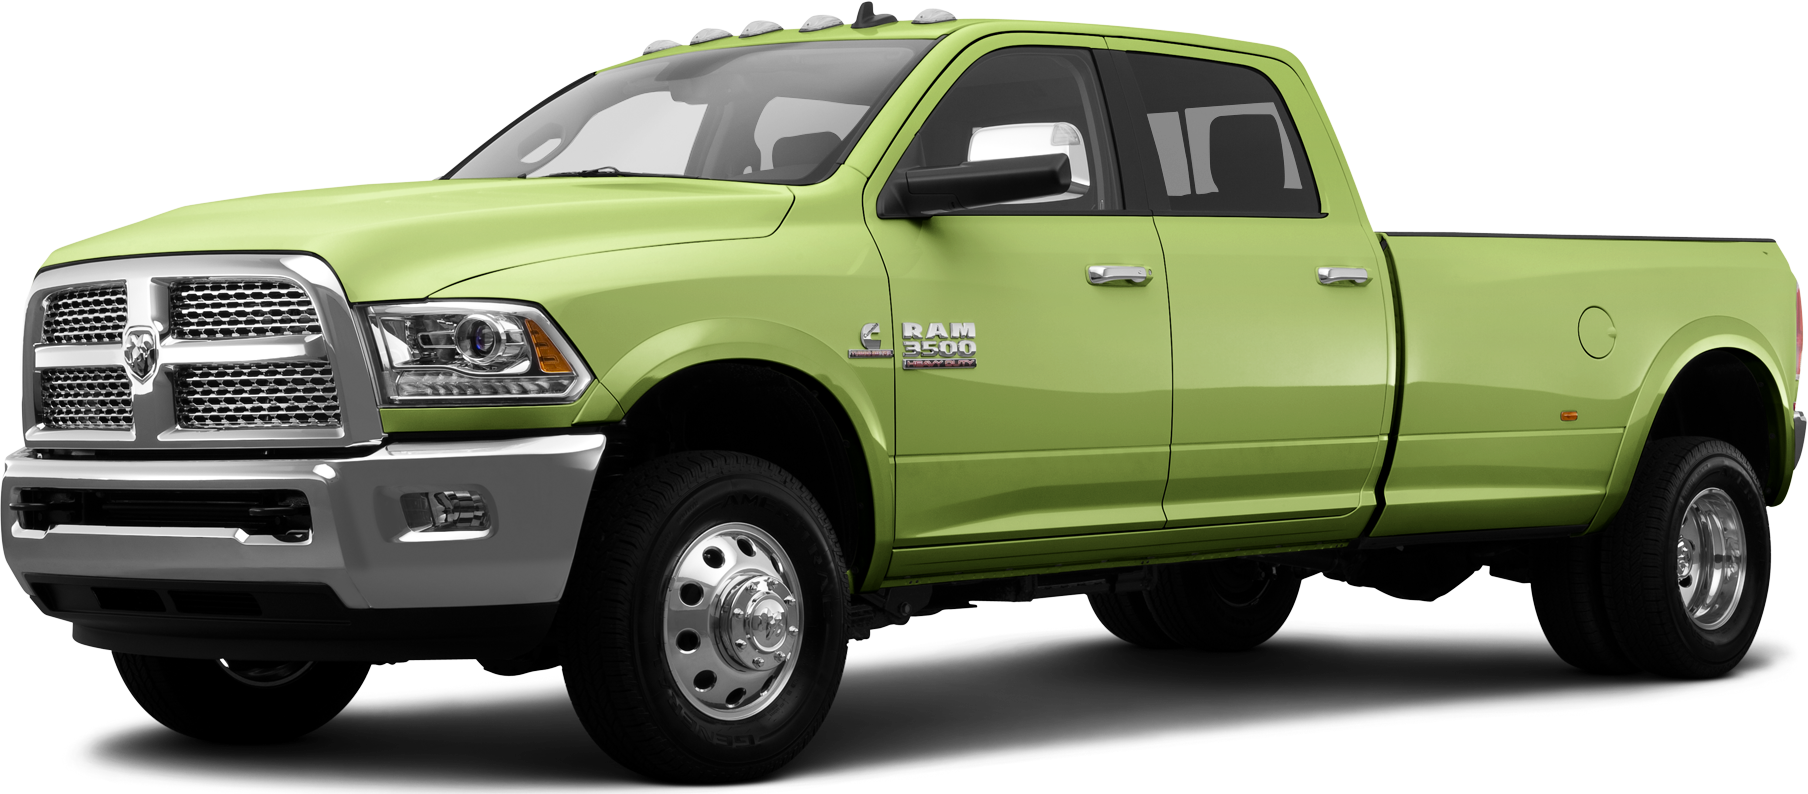 2014 Ram 3500 Crew Cab Price Value Ratings And Reviews Kelley Blue Book